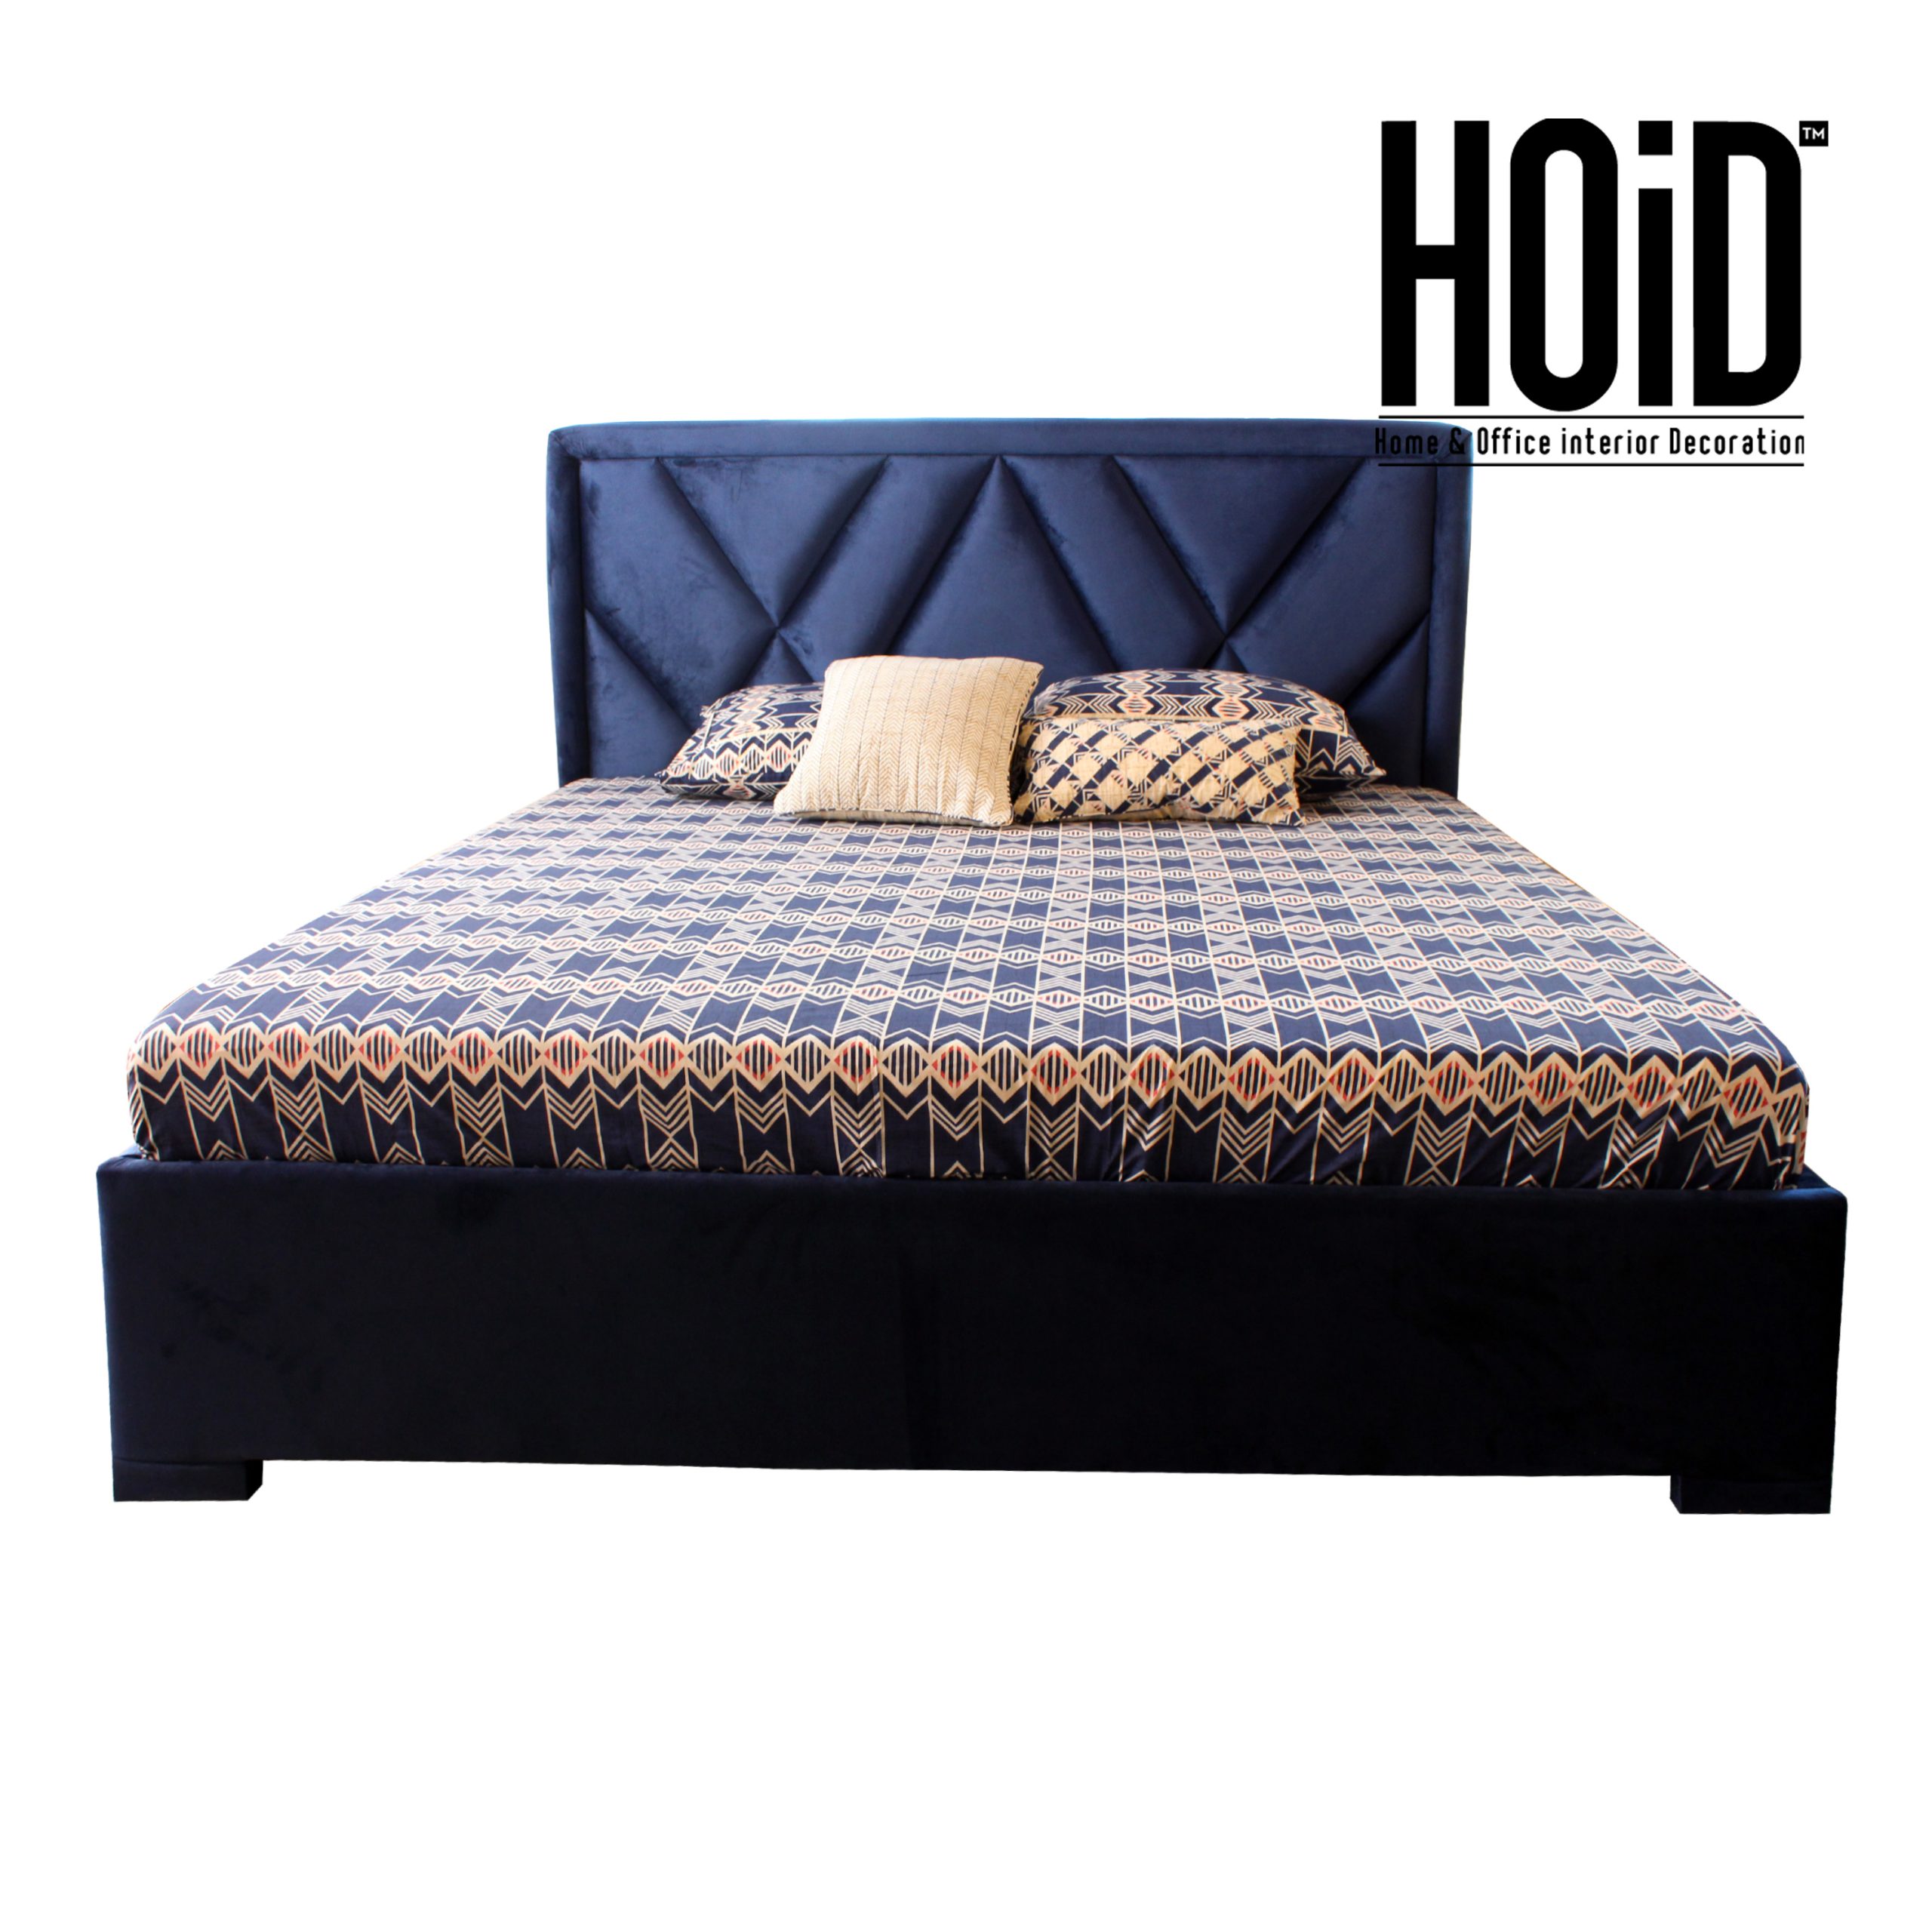 Swiss Tufted Bed Hoid Pk, Swiss Bed Frame